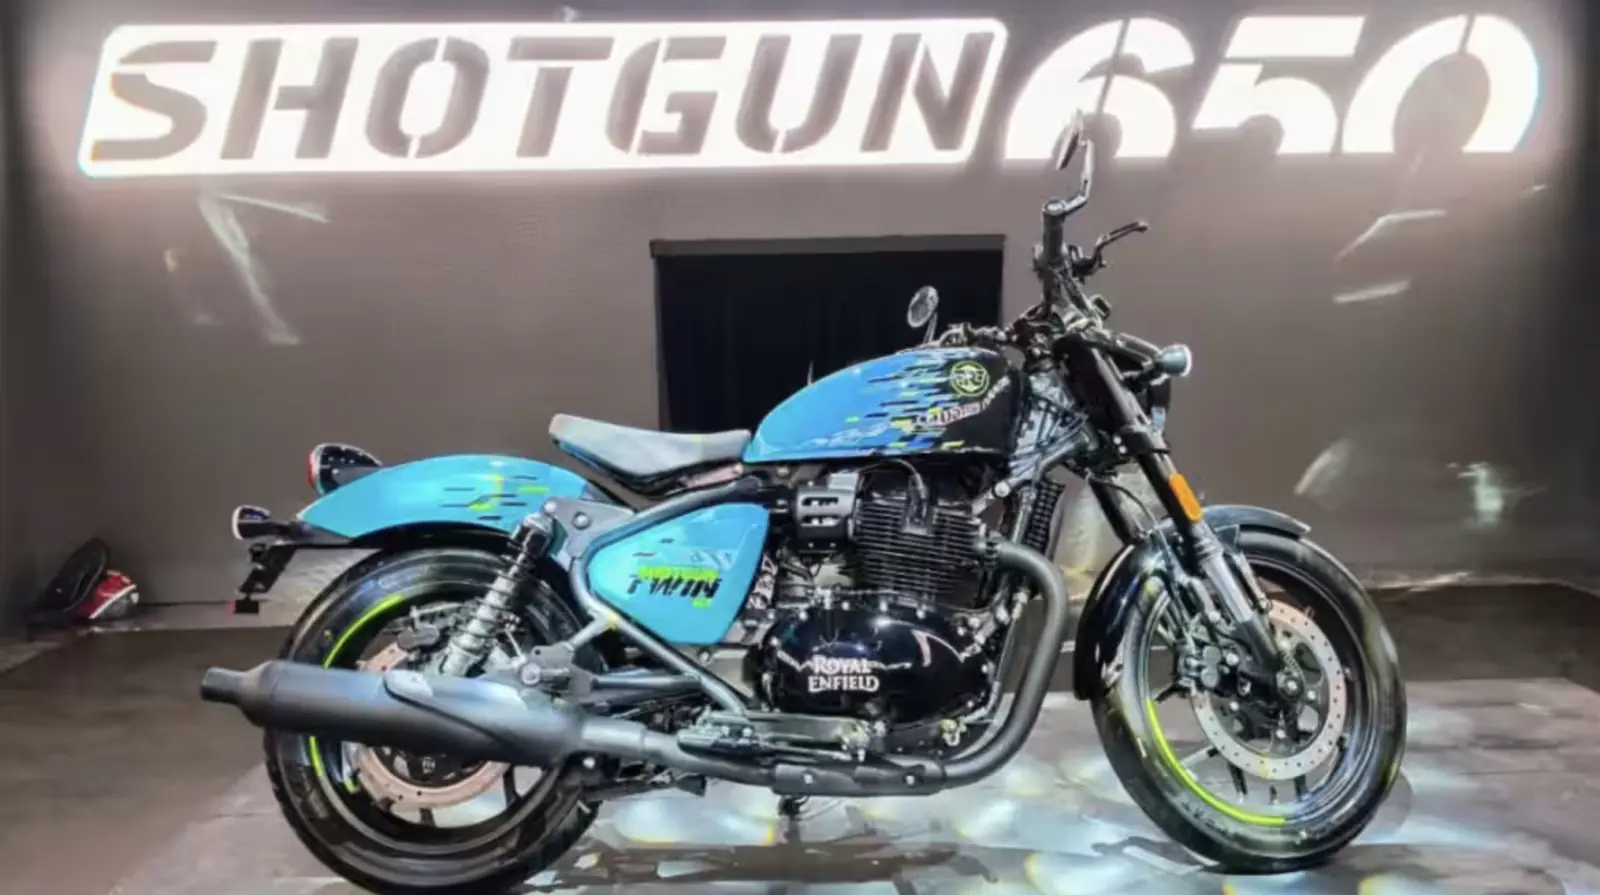 New Royal Enfield Shotgun 650 introduced in Motoverse, price starts from Rs 4.25 lakh